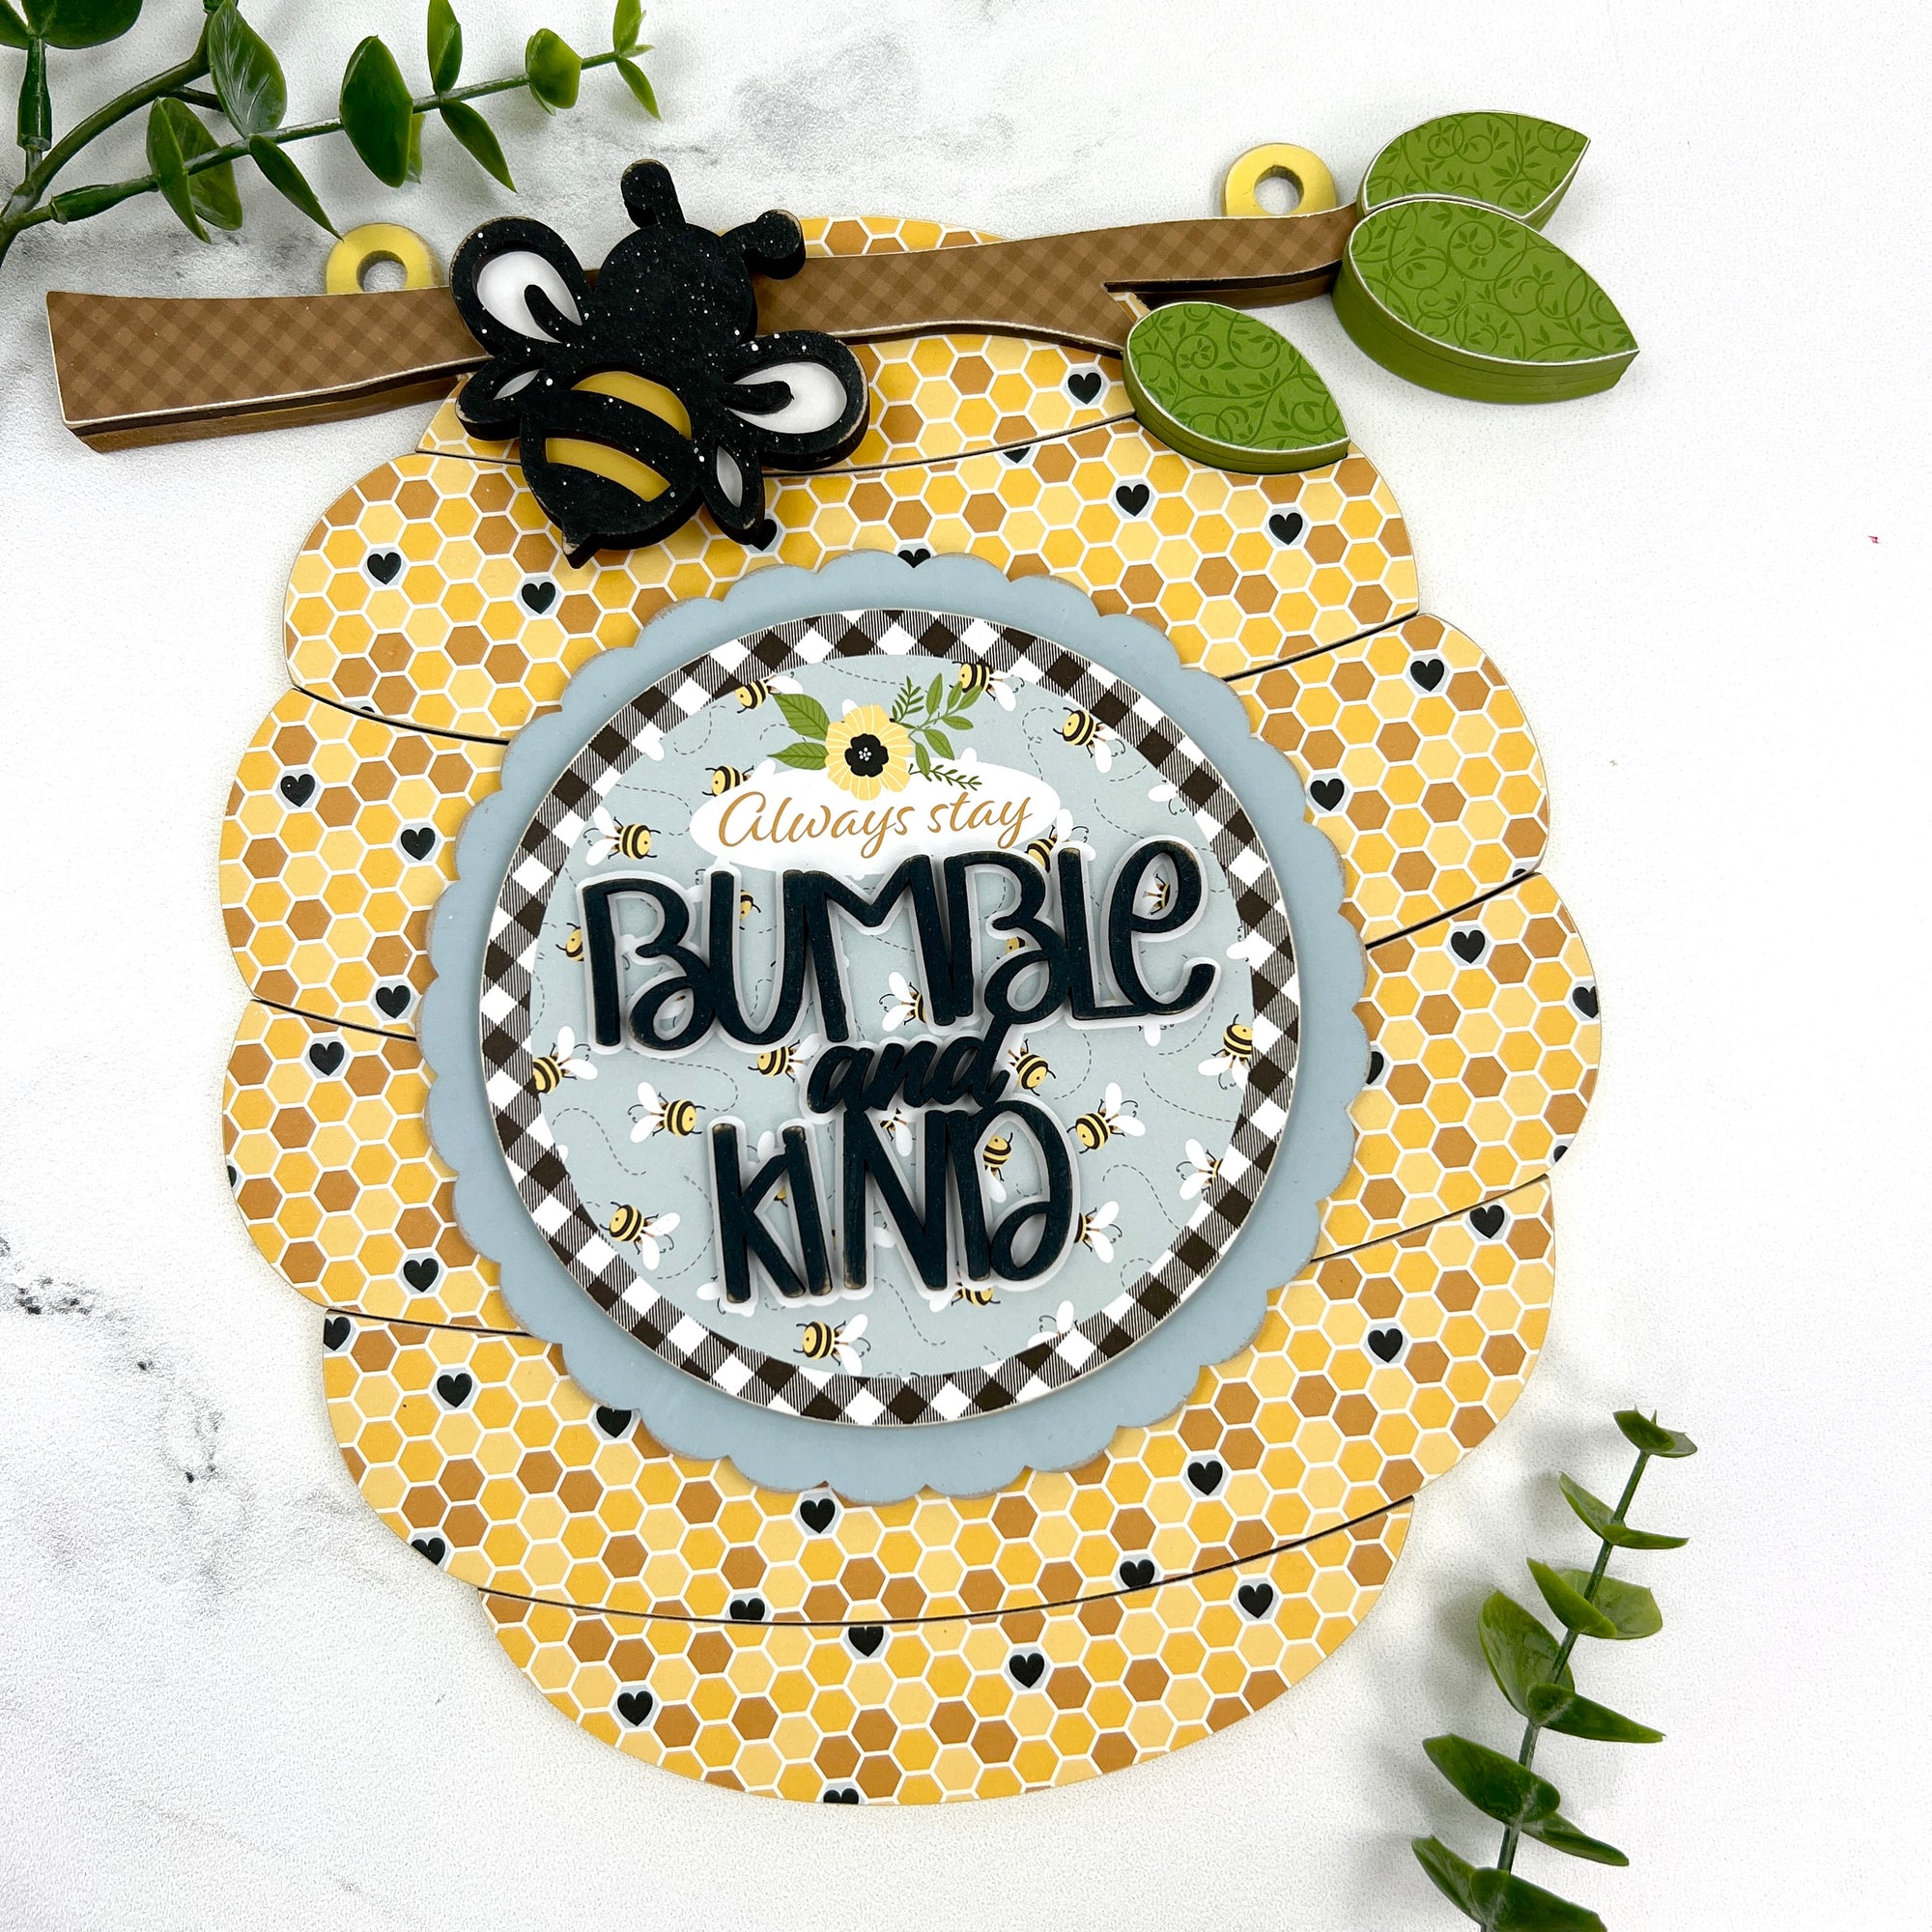 Bee hive wood decor sign with a title that says Bumble and Kind. DIY wood craft kit